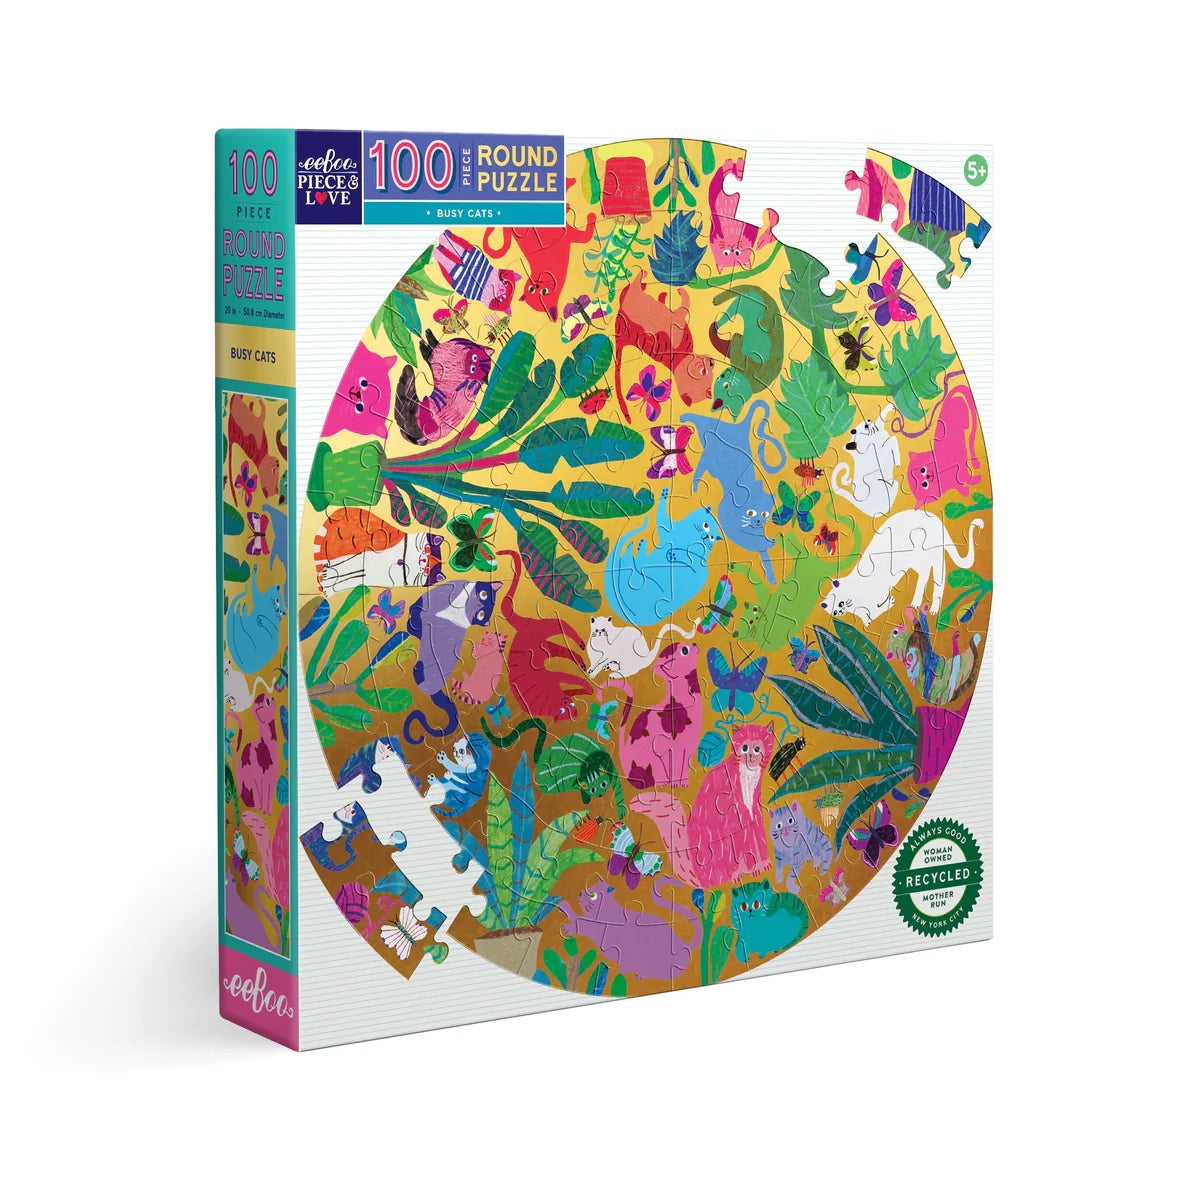 100-piece busy cats round puzzle box